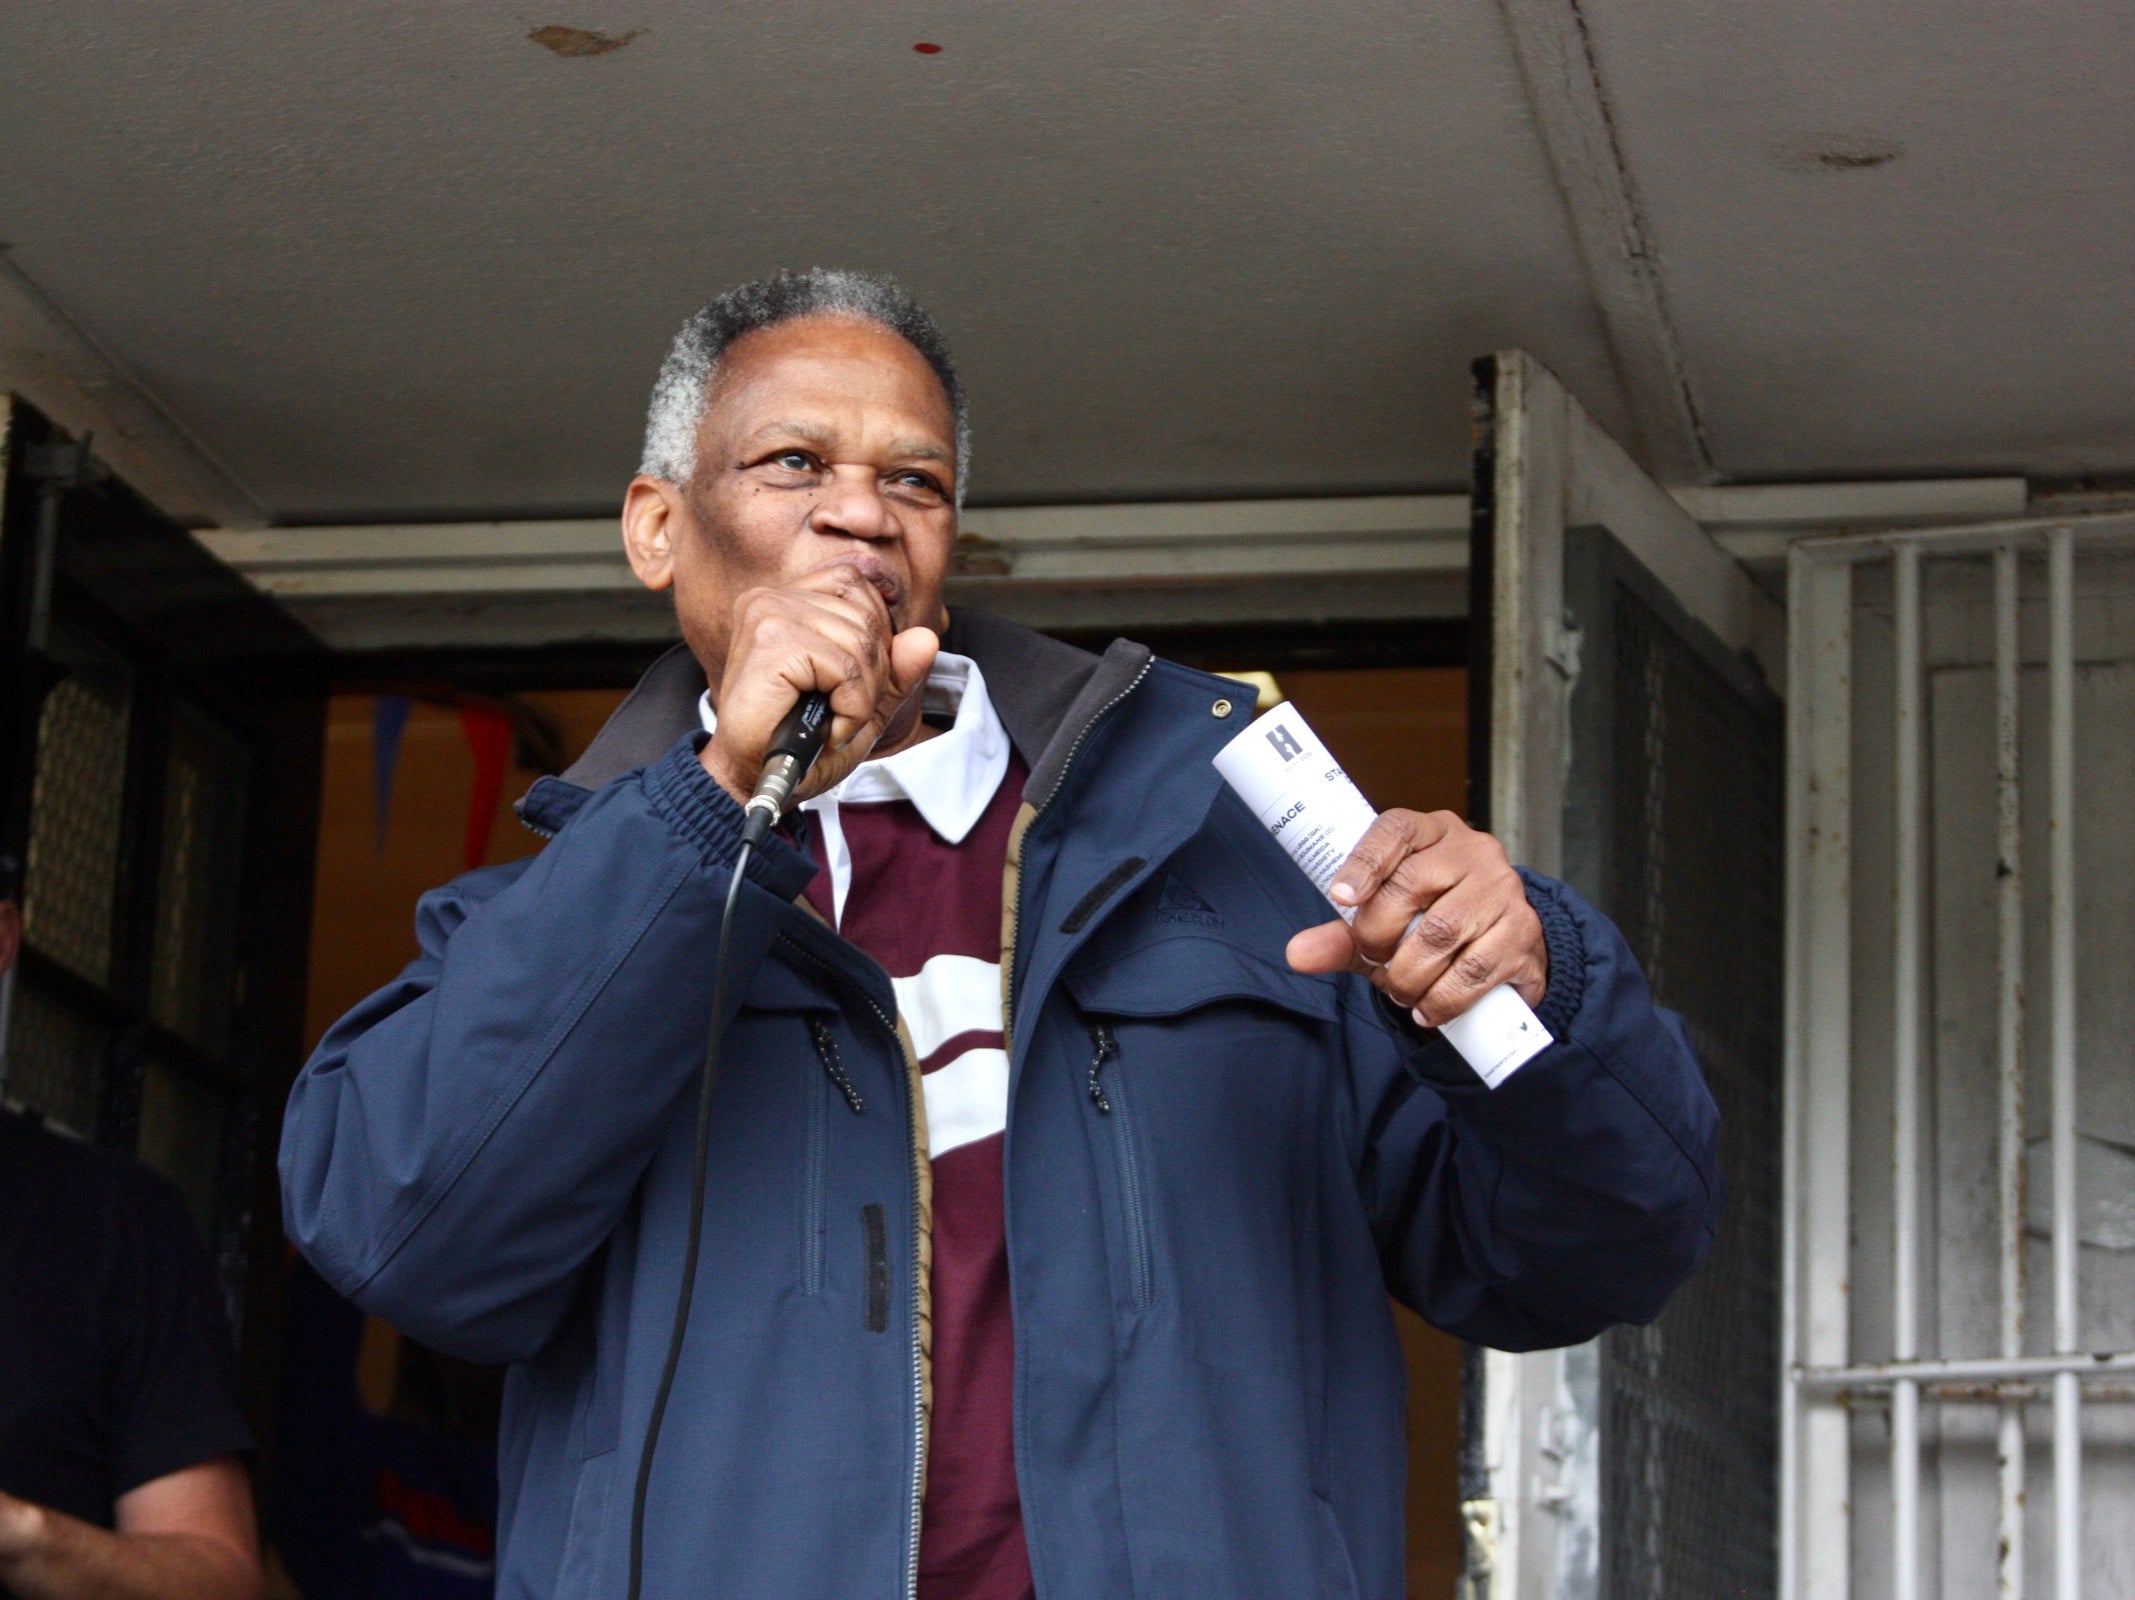 Richard Taylor, the father of Damilola, speaks at Peckham Town